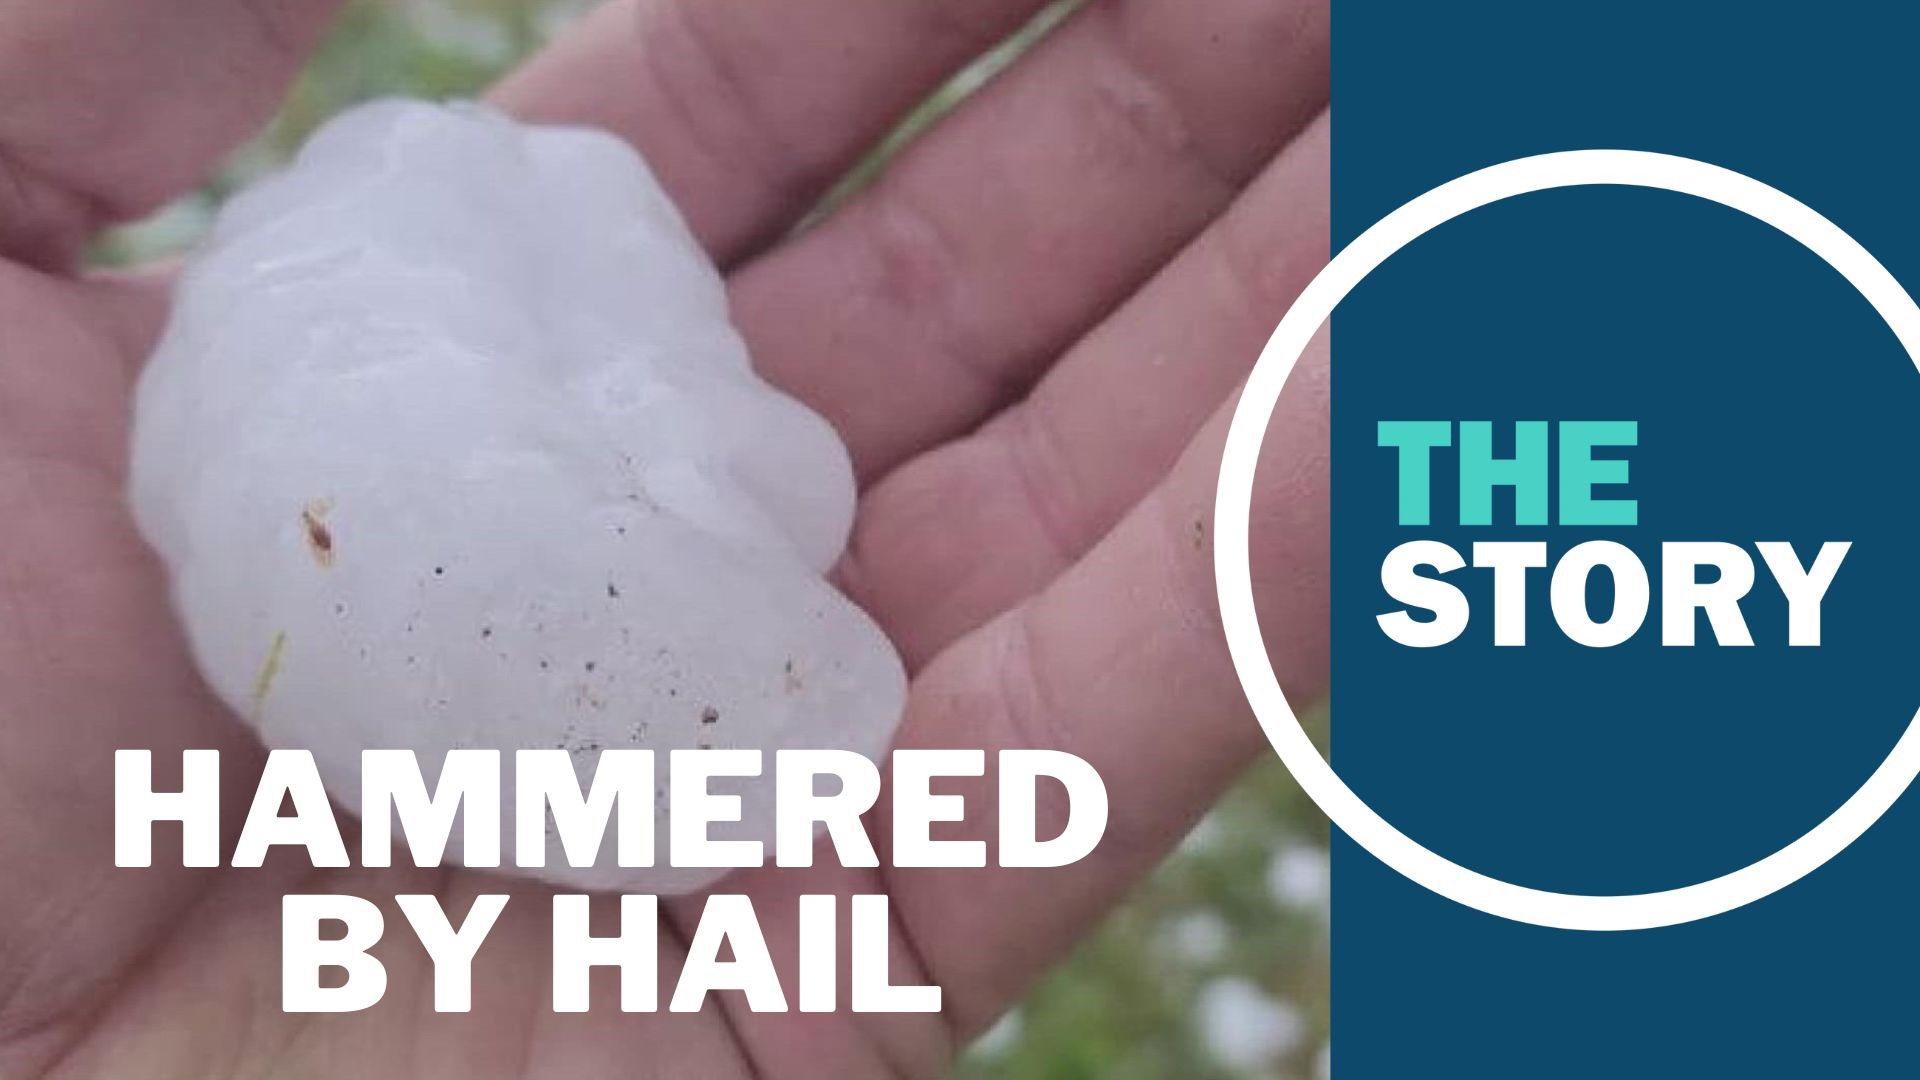 From Wednesday night into Thursday, the northeastern Oregon town was battered by wind, rain and hail. The storm caused major damage in some areas.